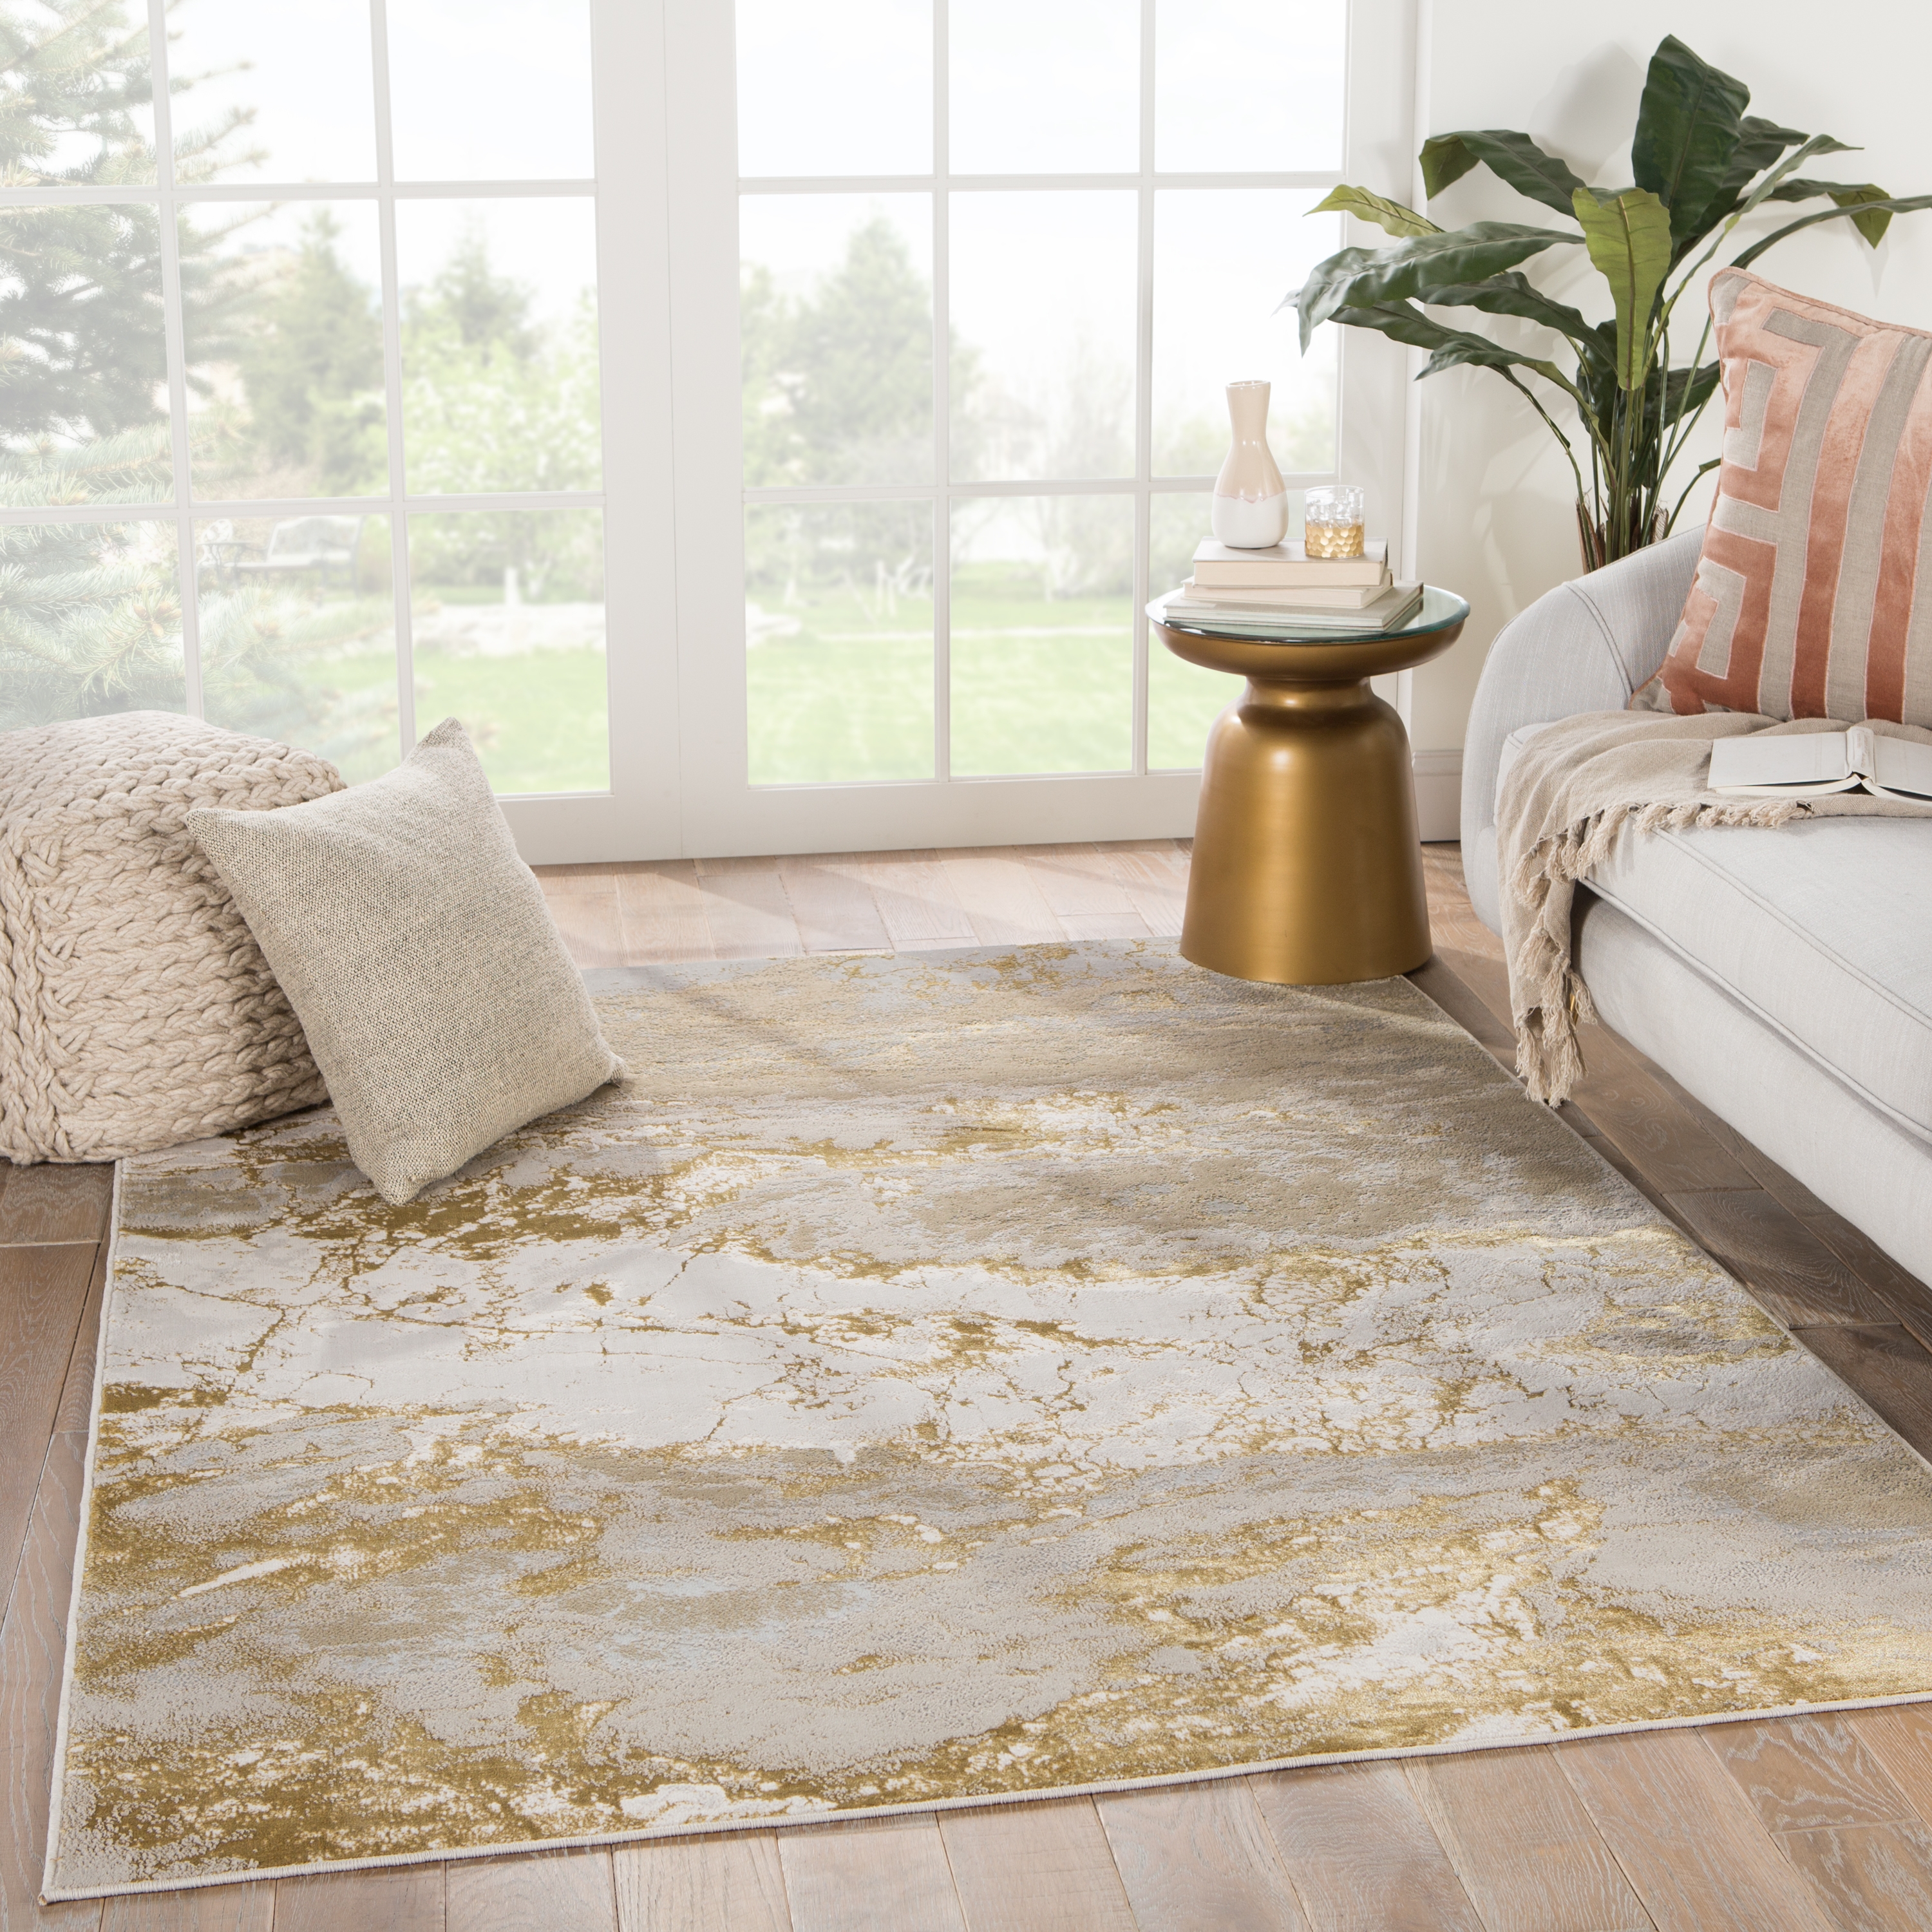 Cisco Abstract Gray/ Gold Area Rug (6'7"X9'6") - Image 4